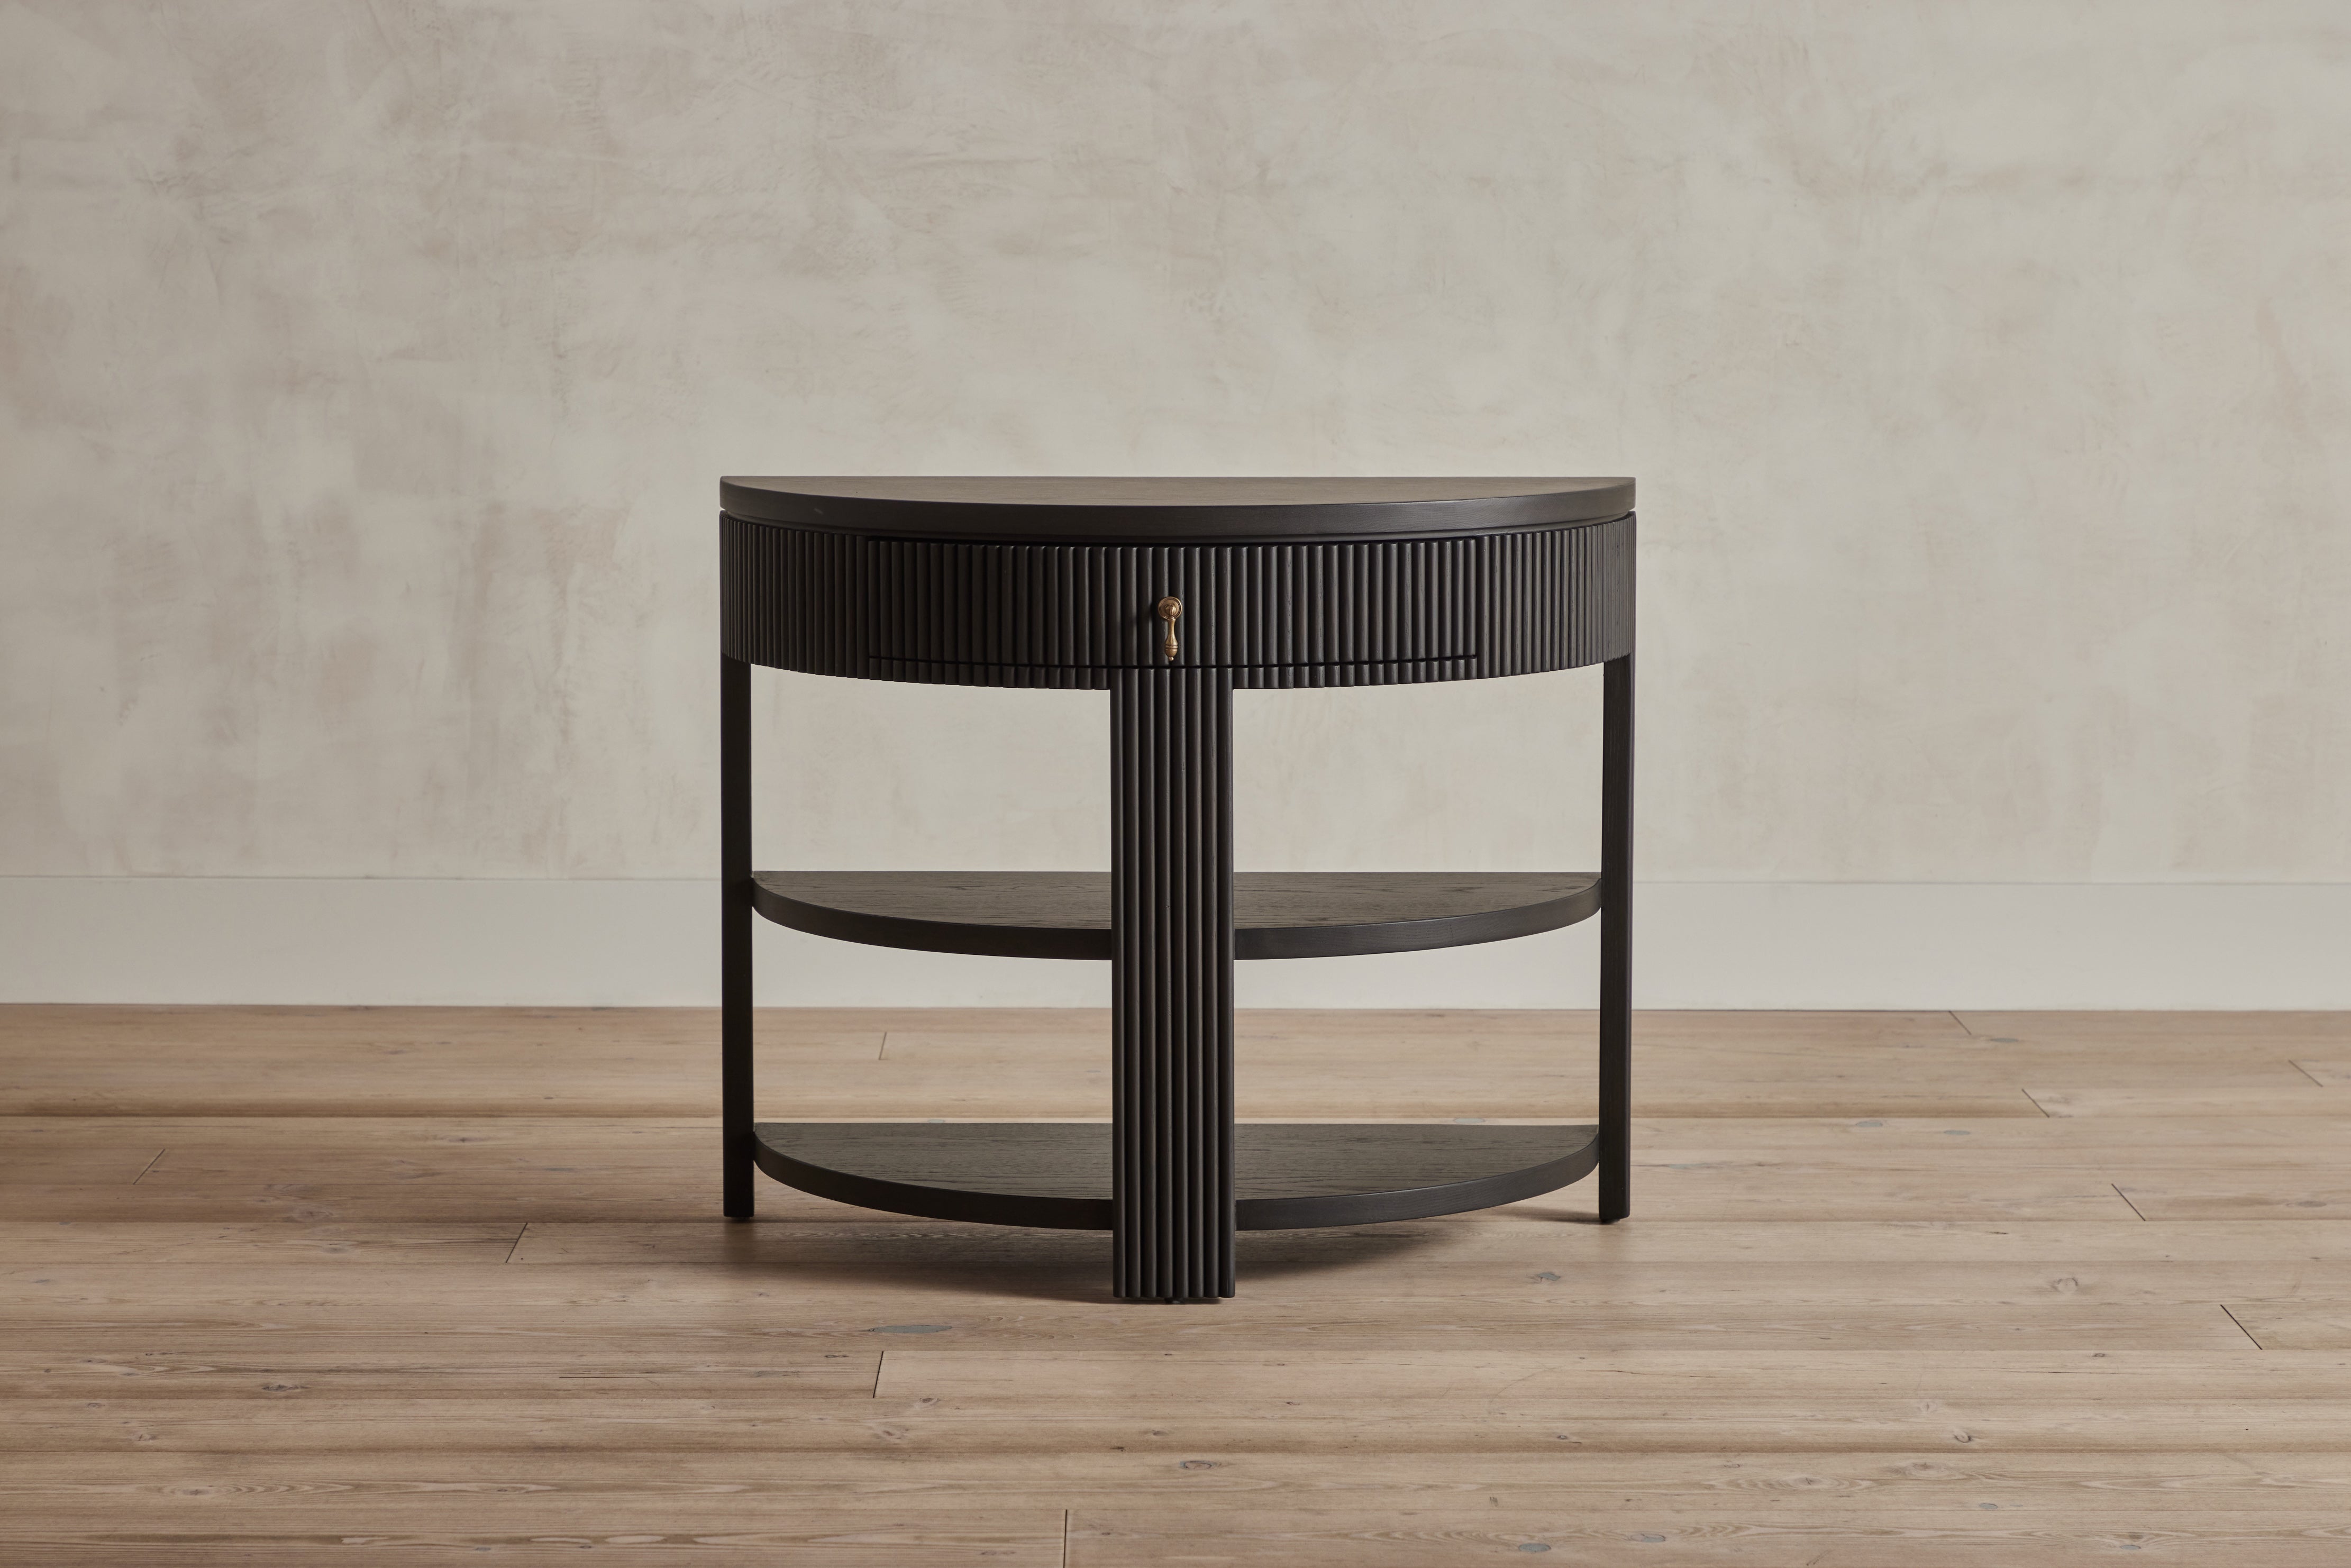 Shown in Ebony with Wood Top|AS SHOWN $4,600